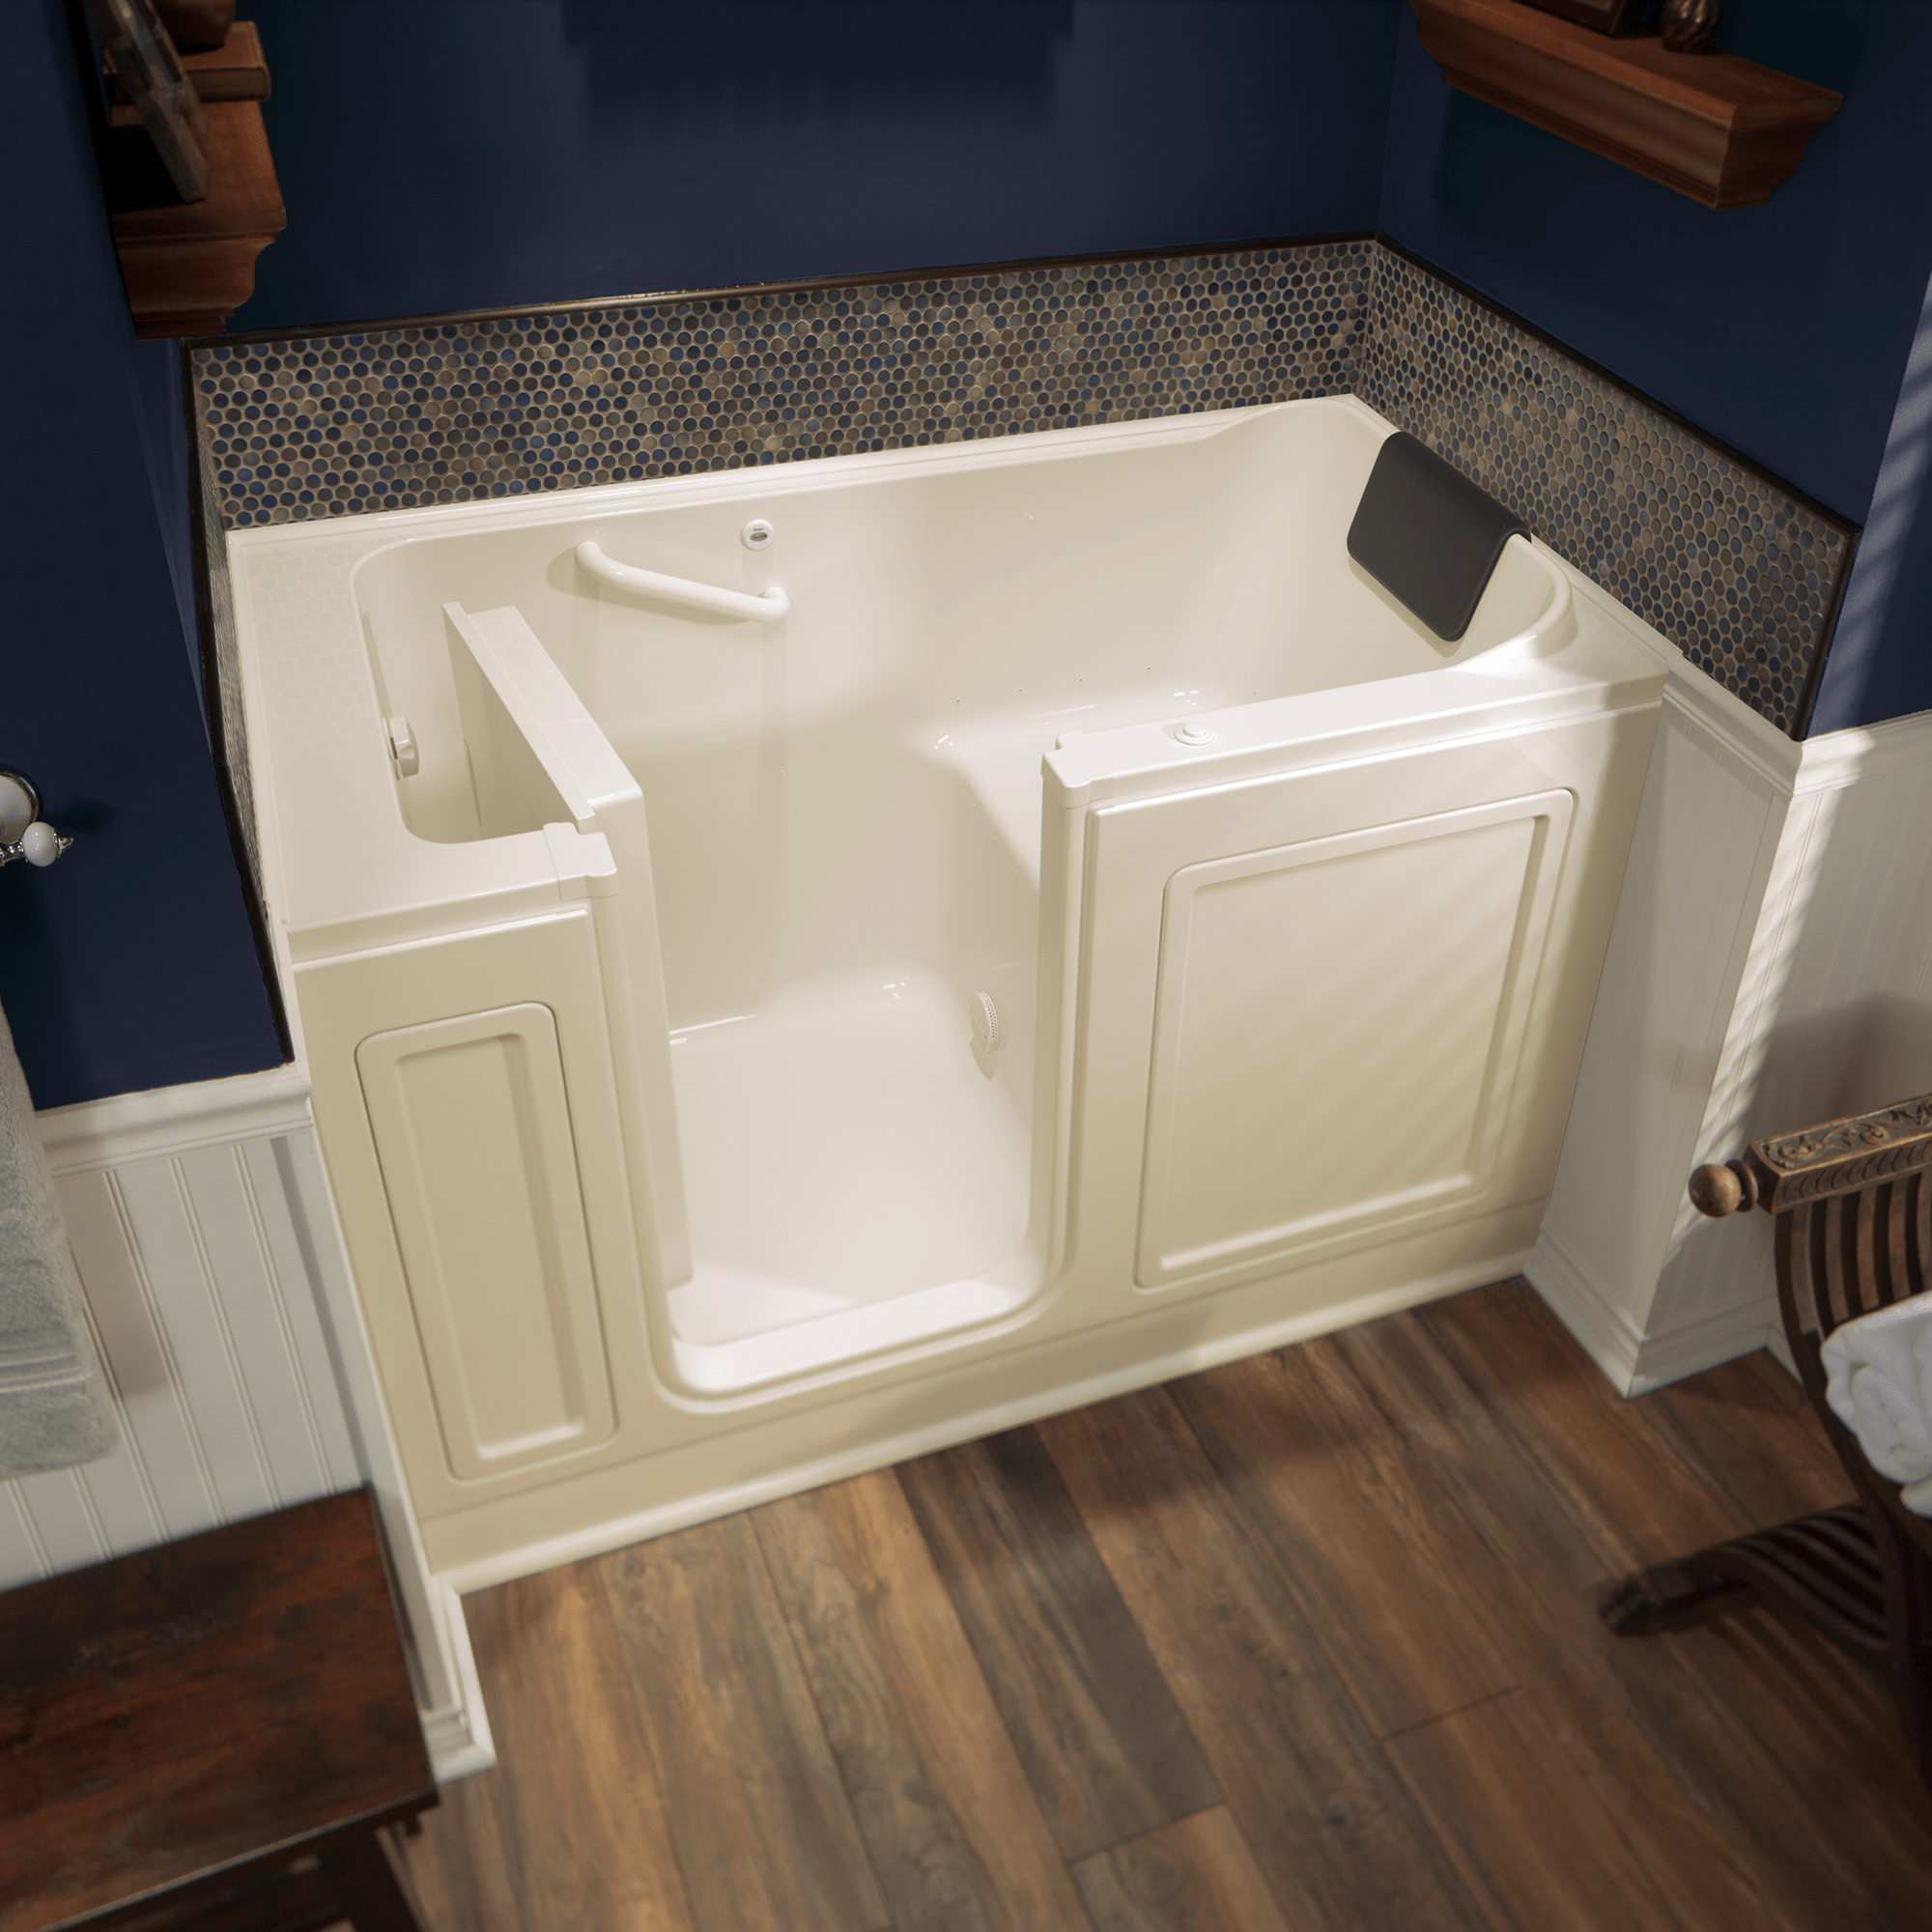 Acrylic Luxury Series 32 x 60 -Inch Walk-in Tub With Air Spa System - Left-Hand Drain